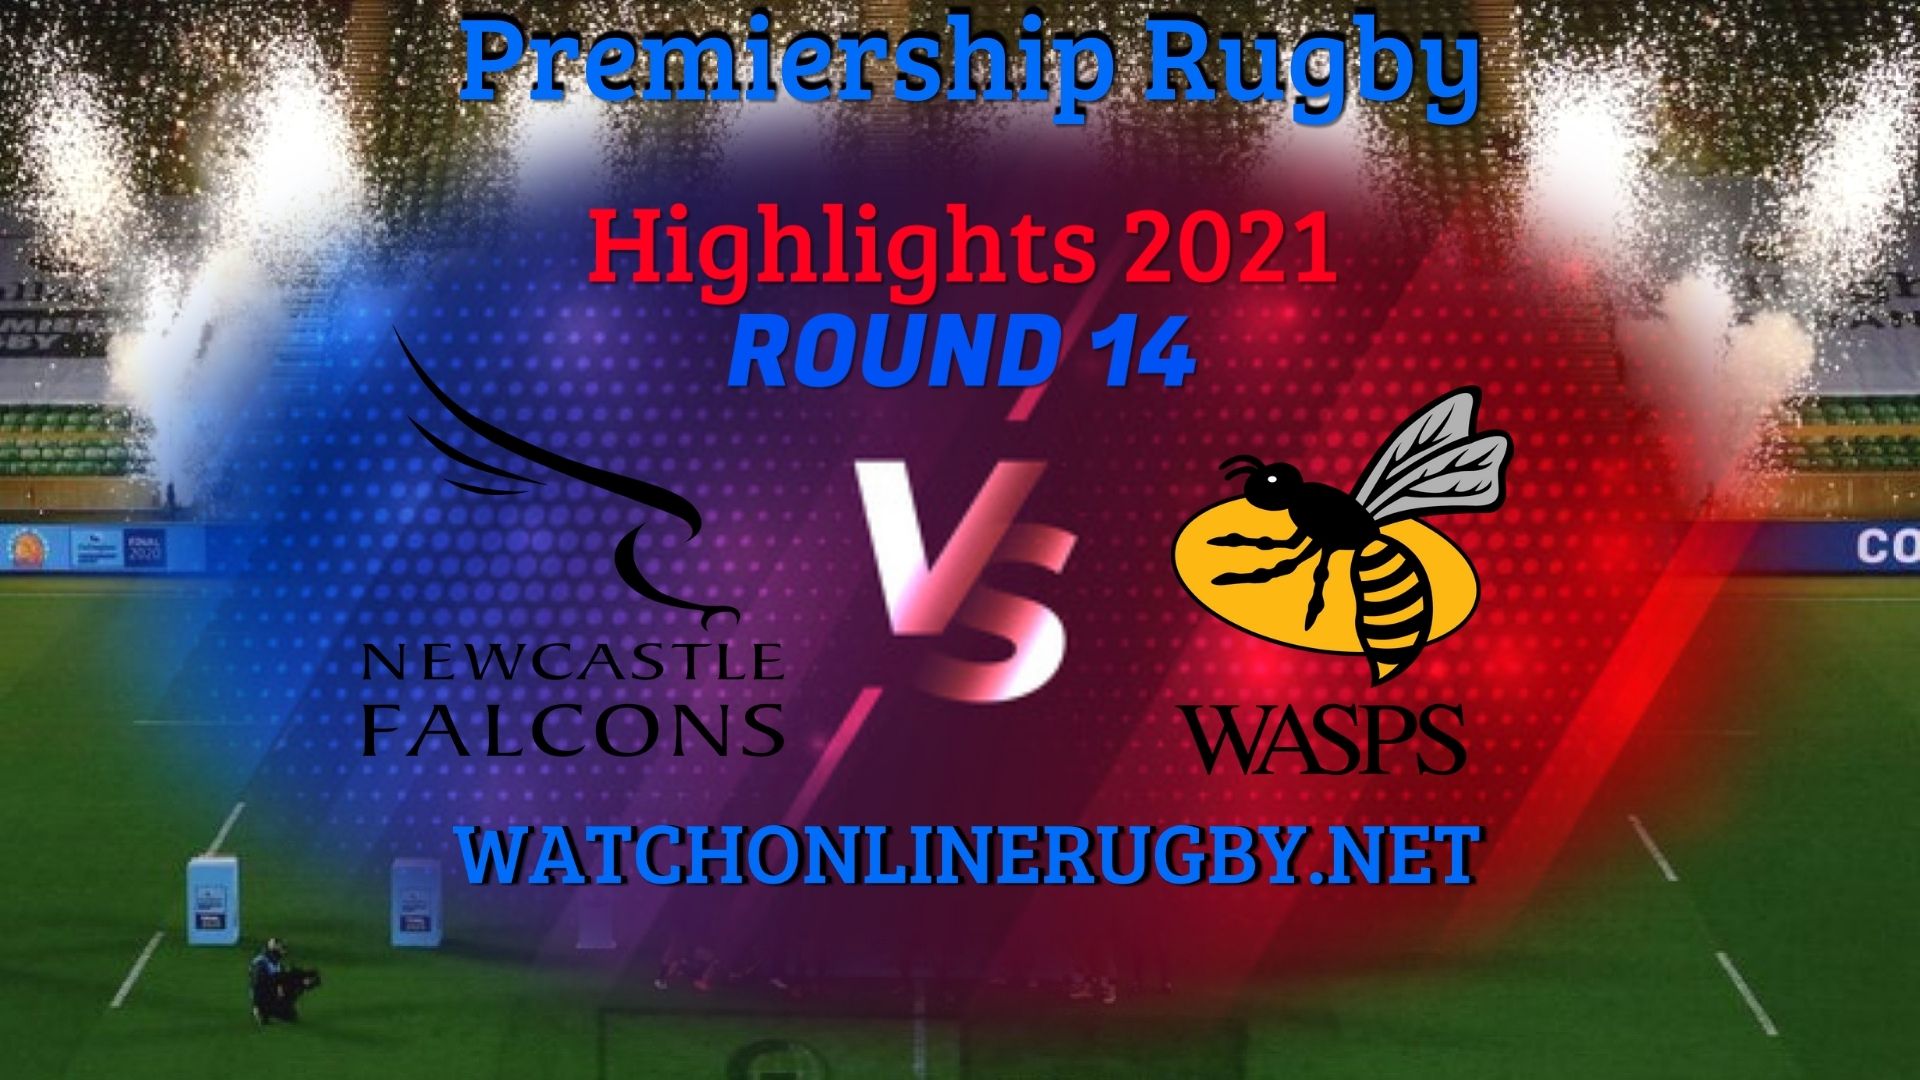 Newcastle Falcons Vs Wasps Premiership Rugby 2021 RD 14